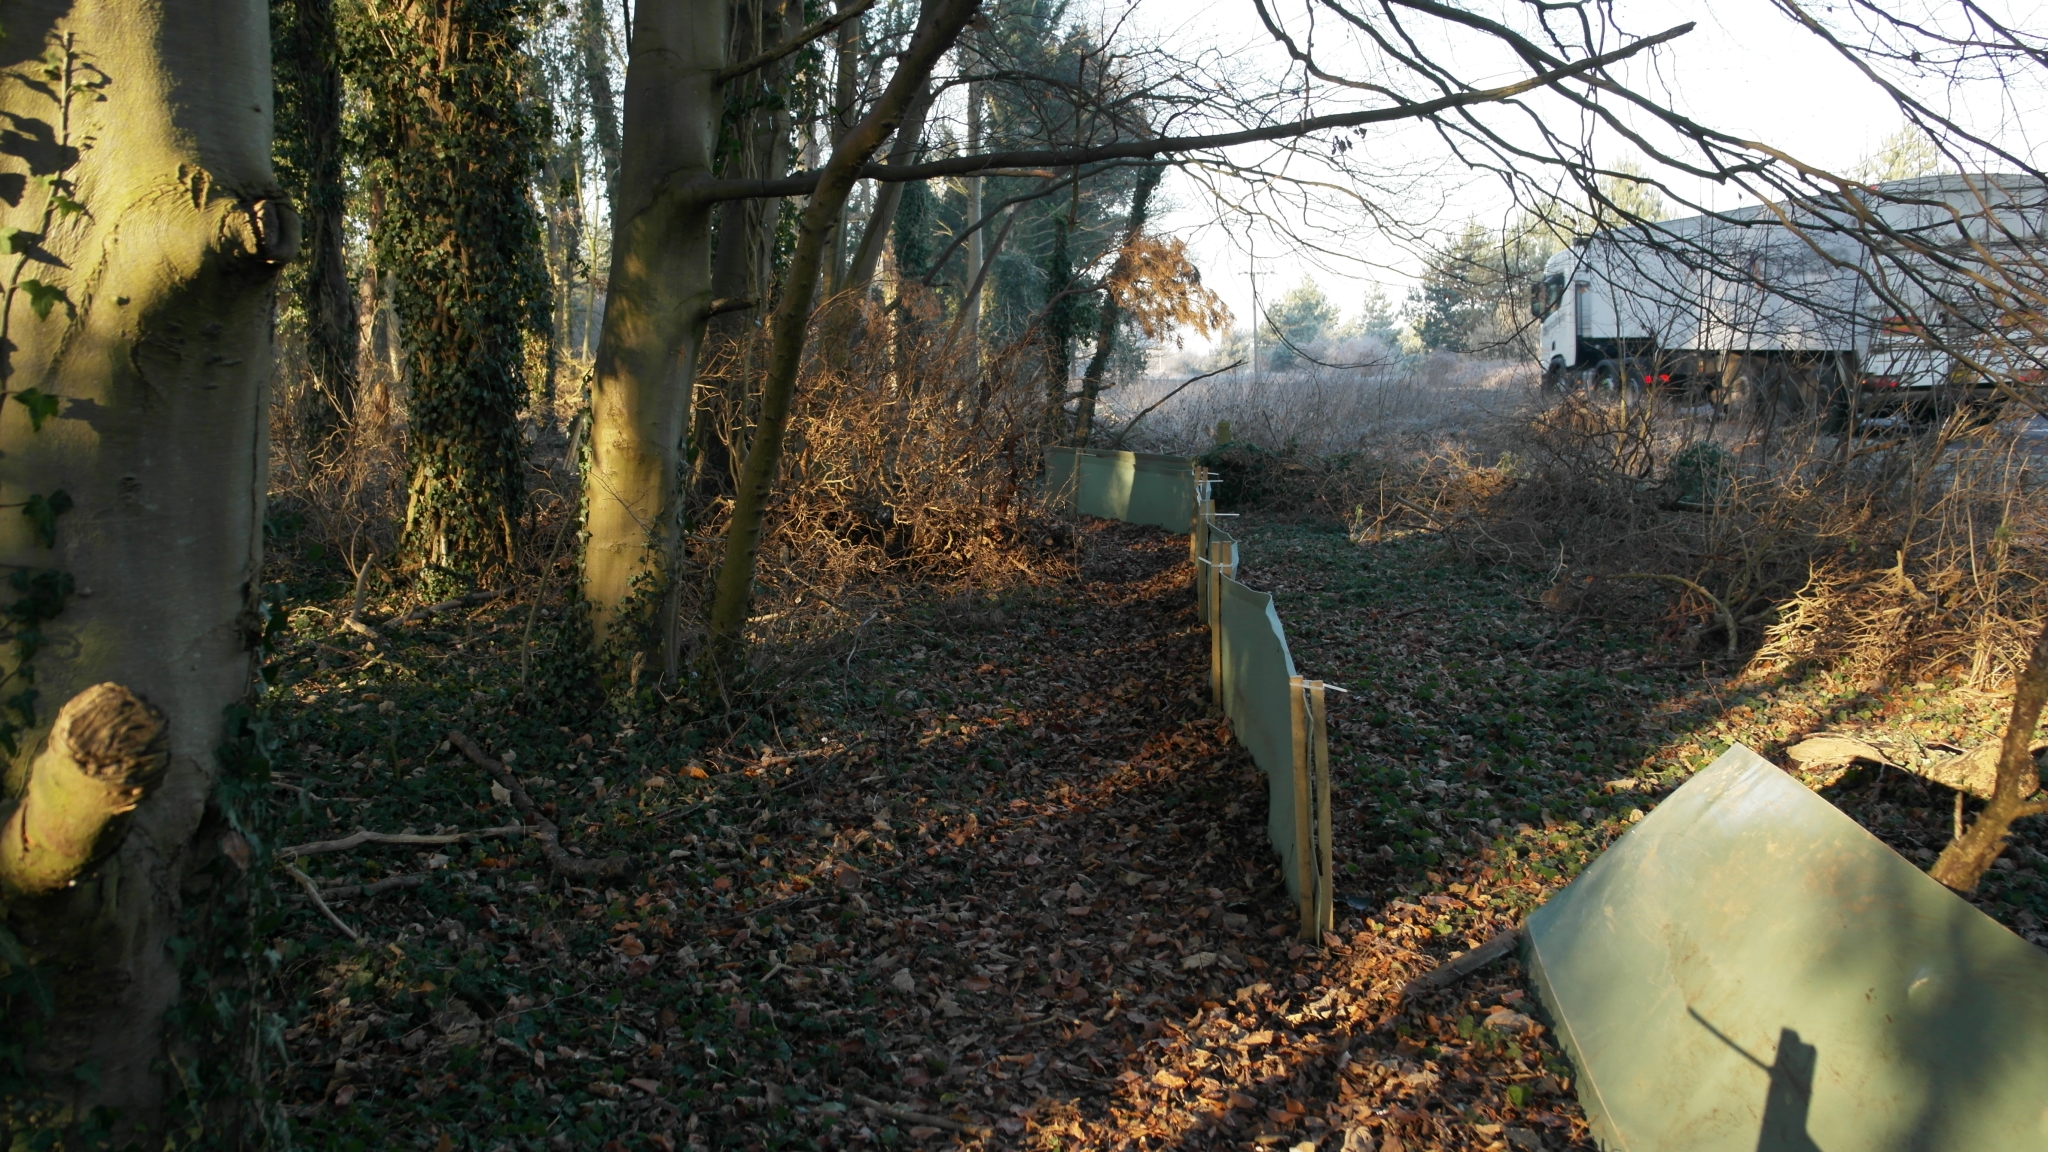 A photo from the FoTF Conservation Event - January 2019 - Erecting the Toad Fence at Cranwich : A section of the erected fence